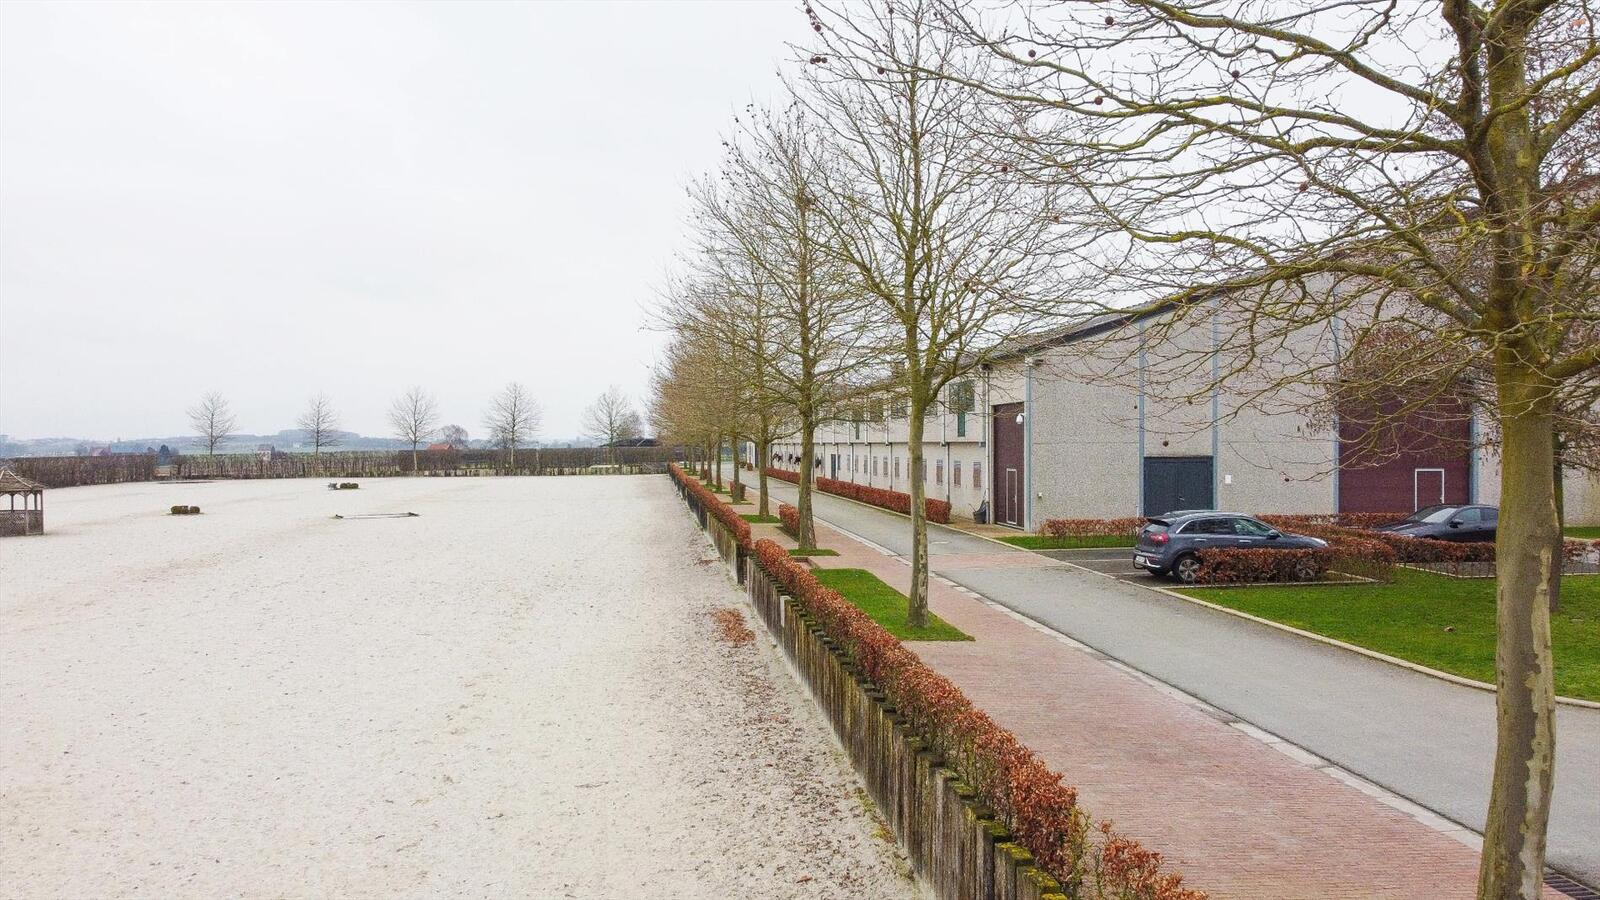 Exclusive professional equestrian center on more than 16ha at Rebecq (Walloon Brabant; Brussels; Belgium) 